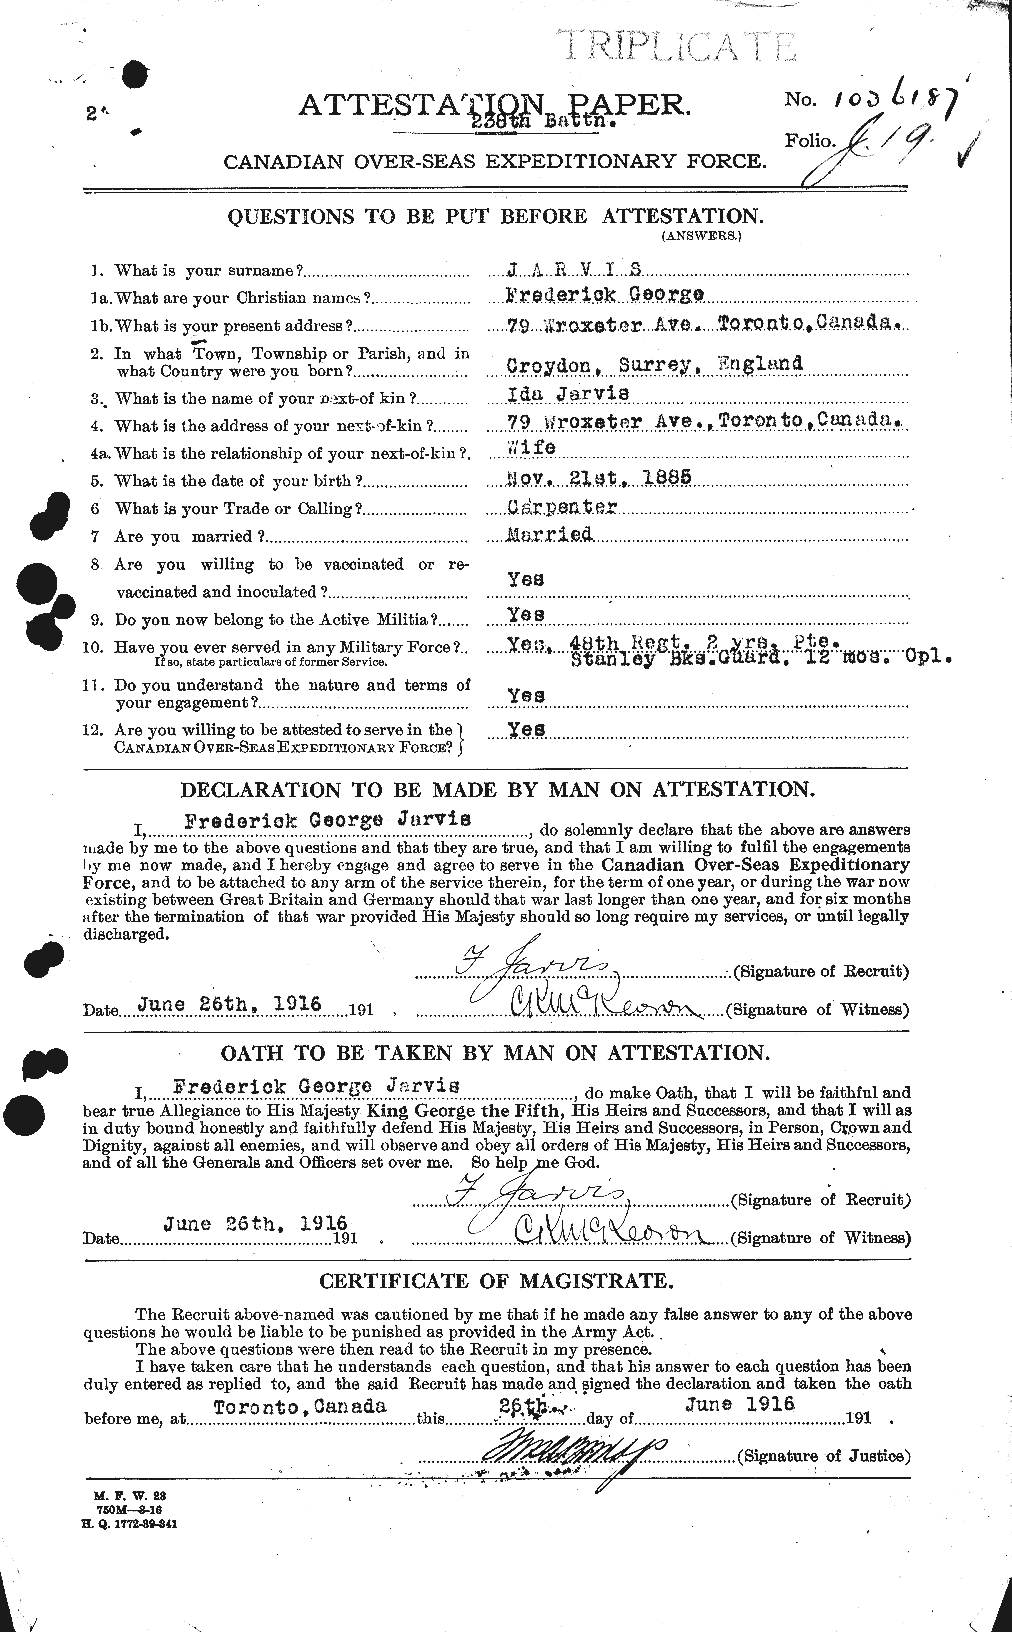 Personnel Records of the First World War - CEF 414696a